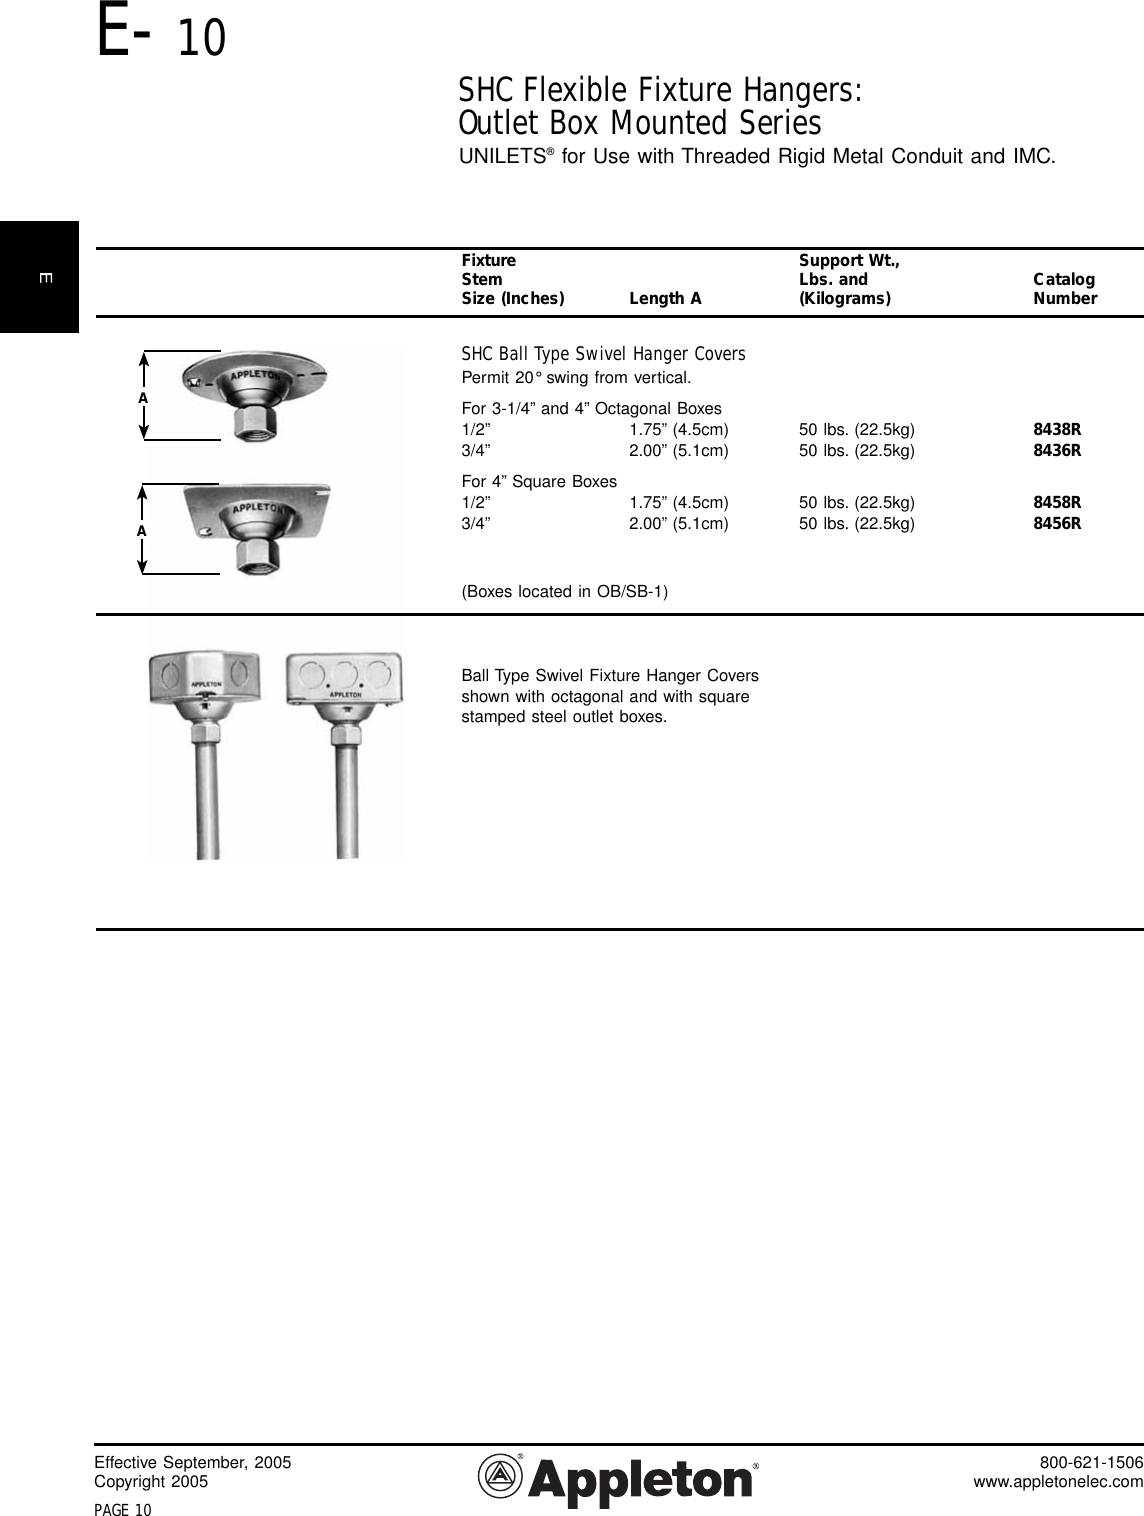 Page 9 of 11 - Product Detail Manual 